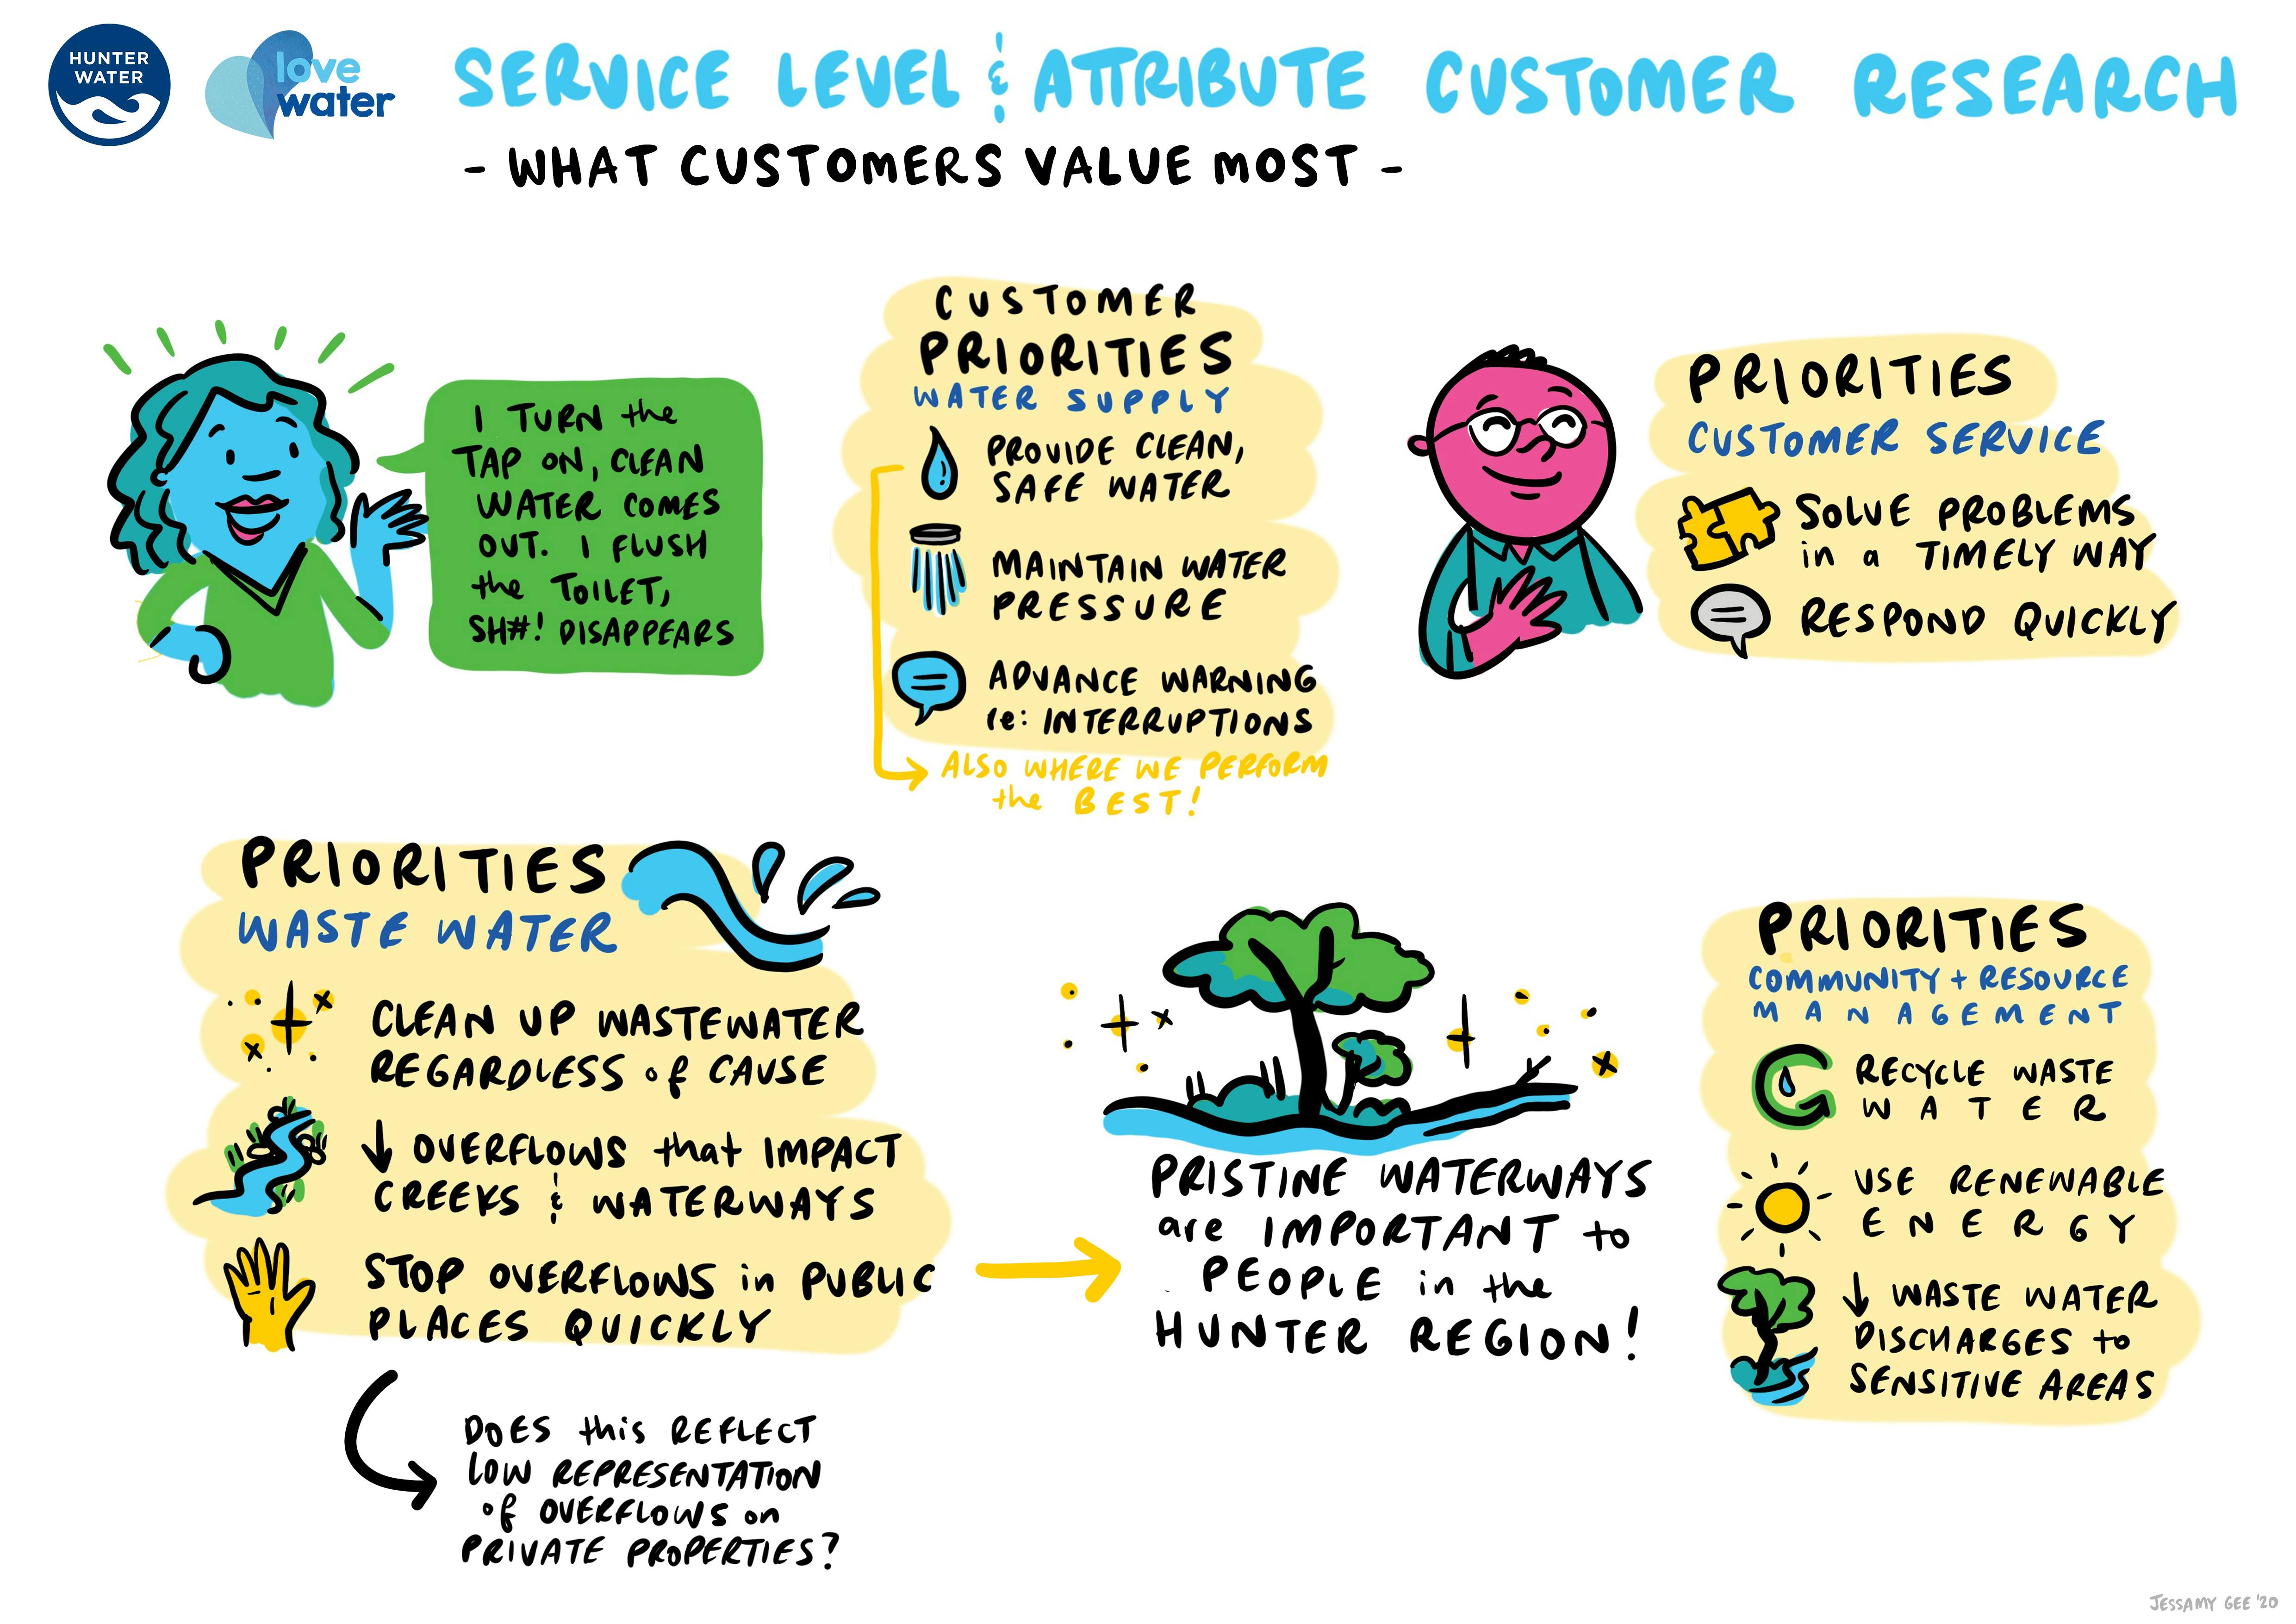 What customers value most